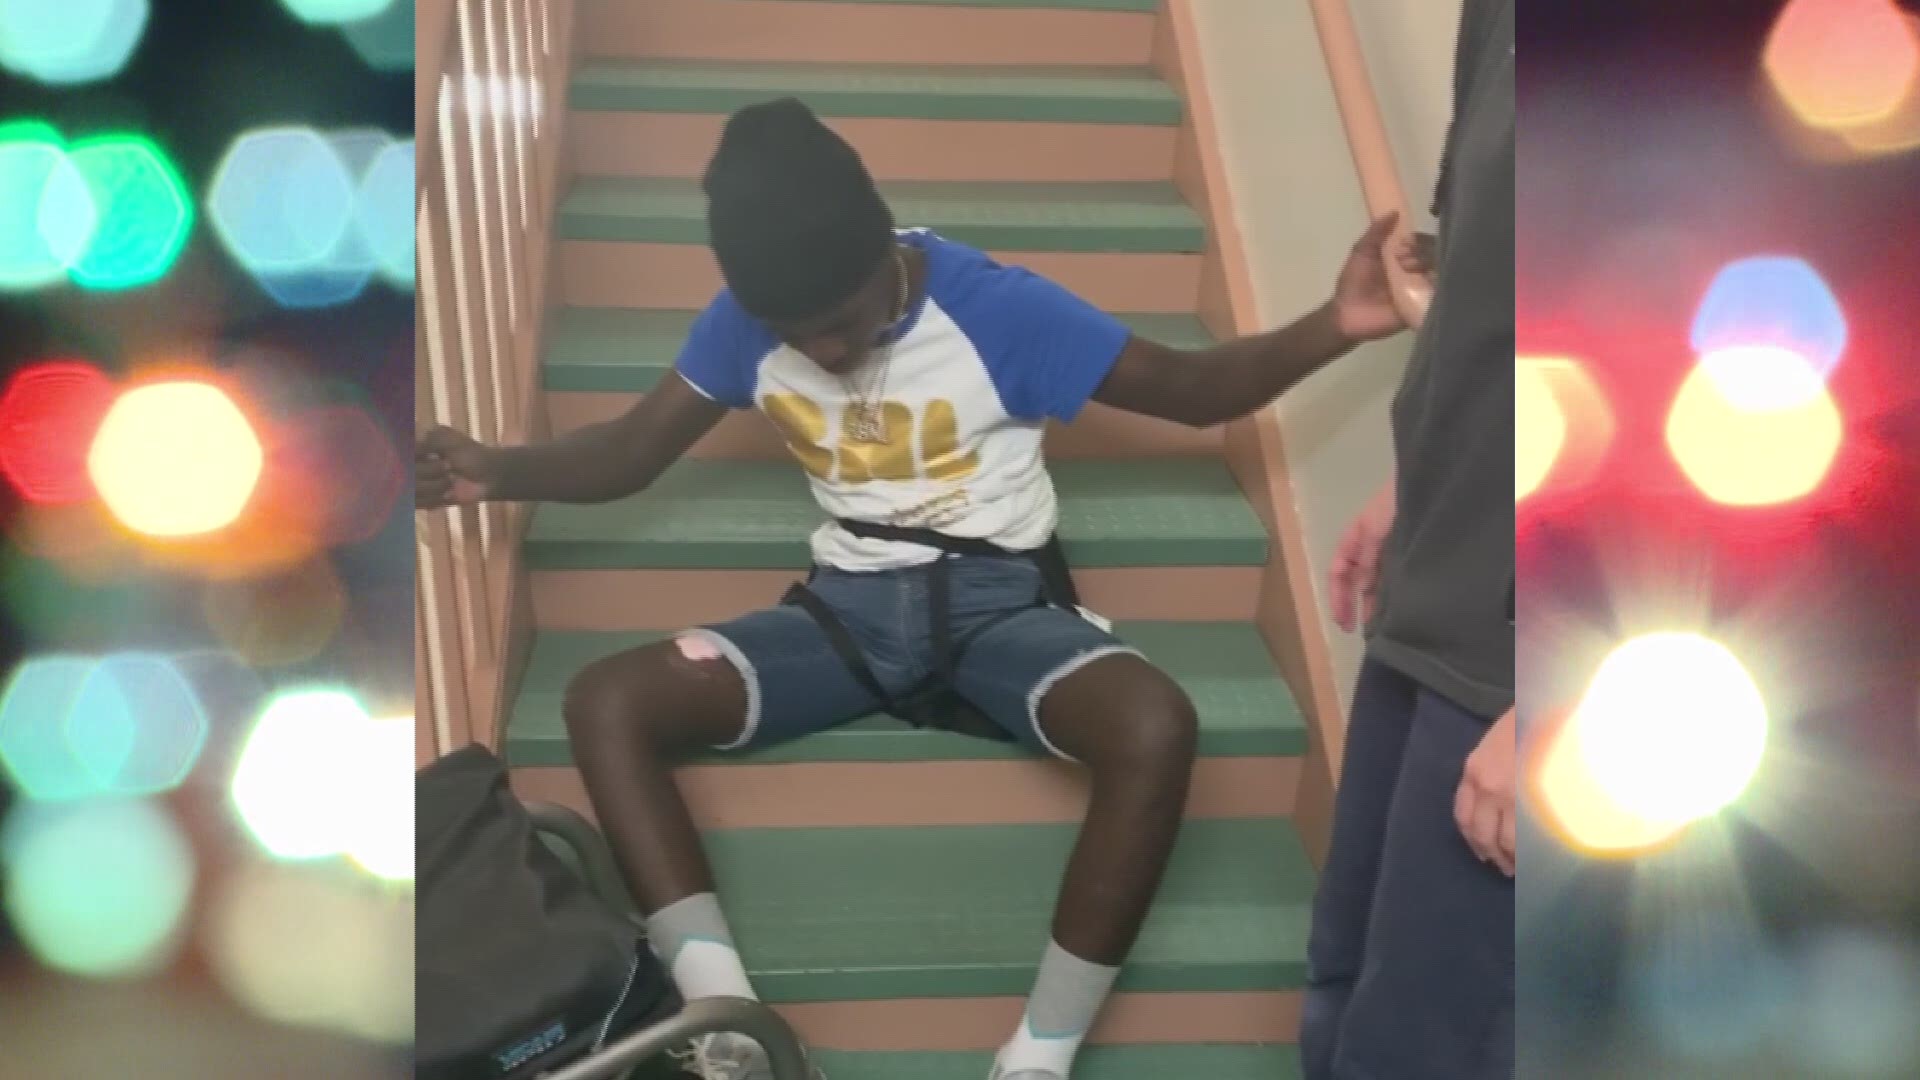 Hill captures video of her son, Roy'Nal, at his first outpatient physical therapy session.